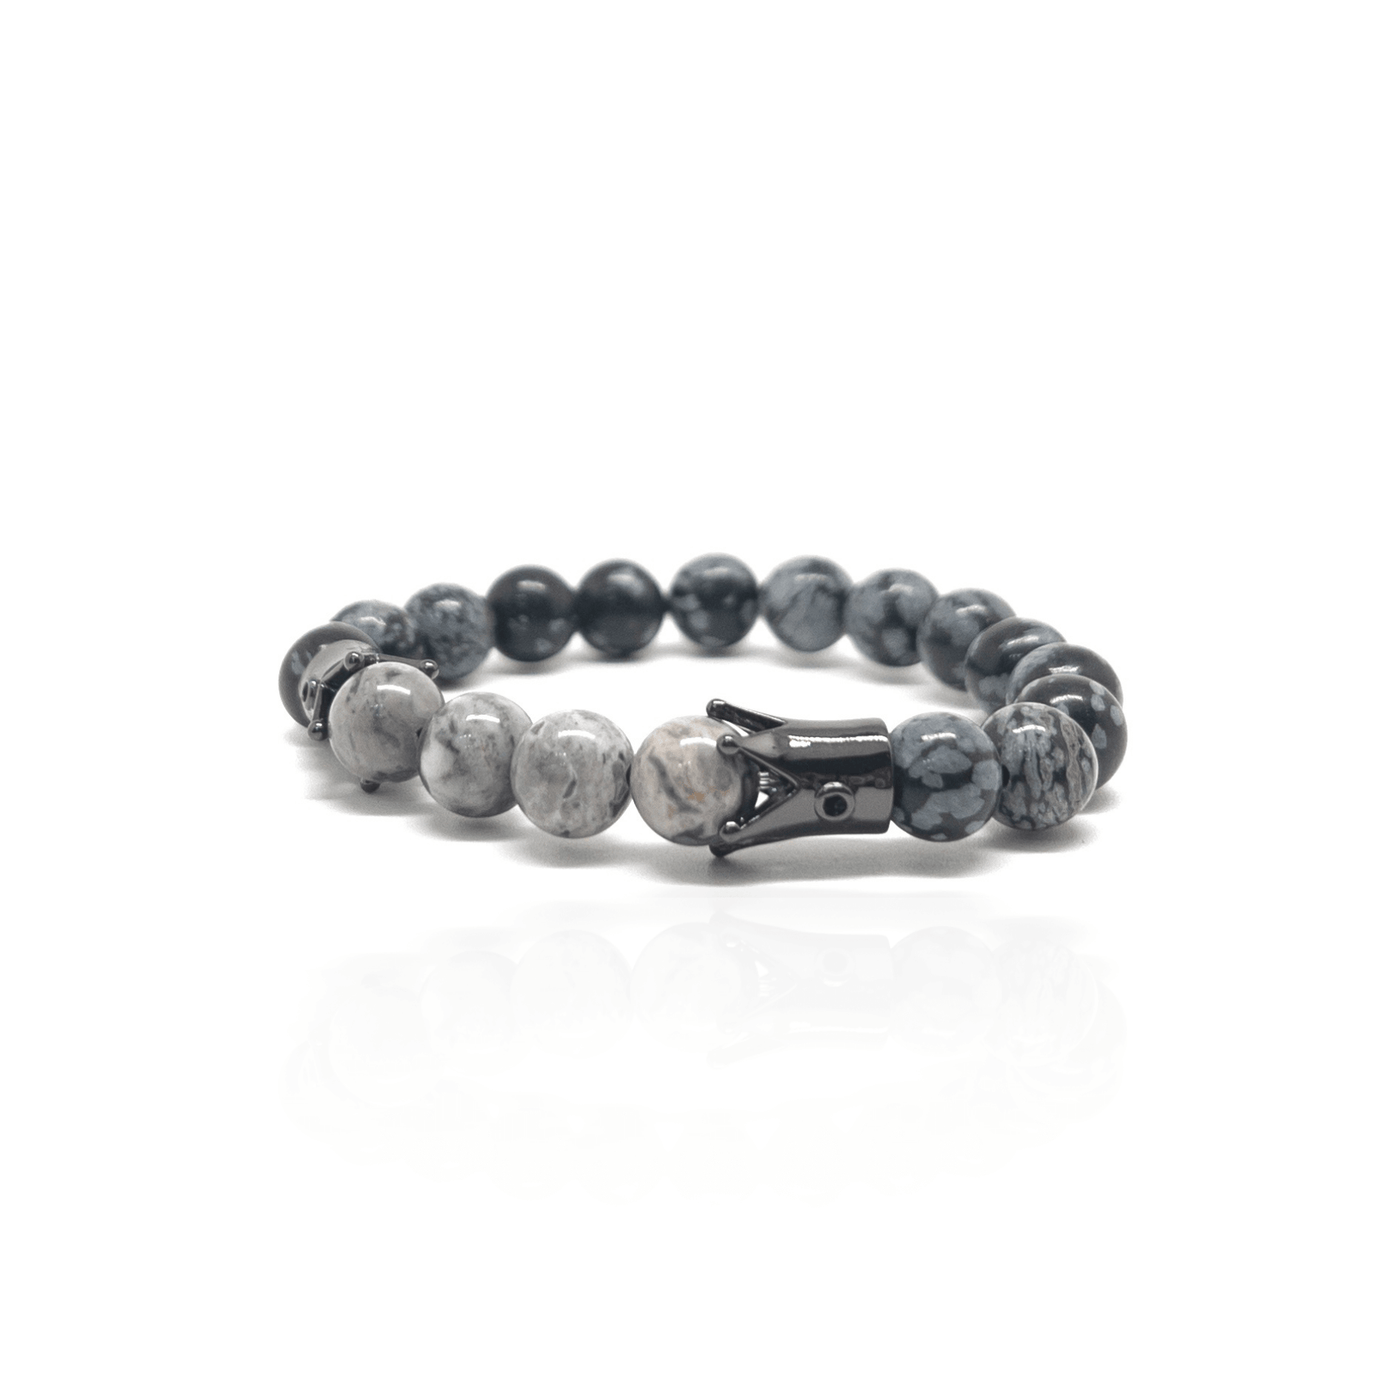 The Double Black Plated King Bracelet